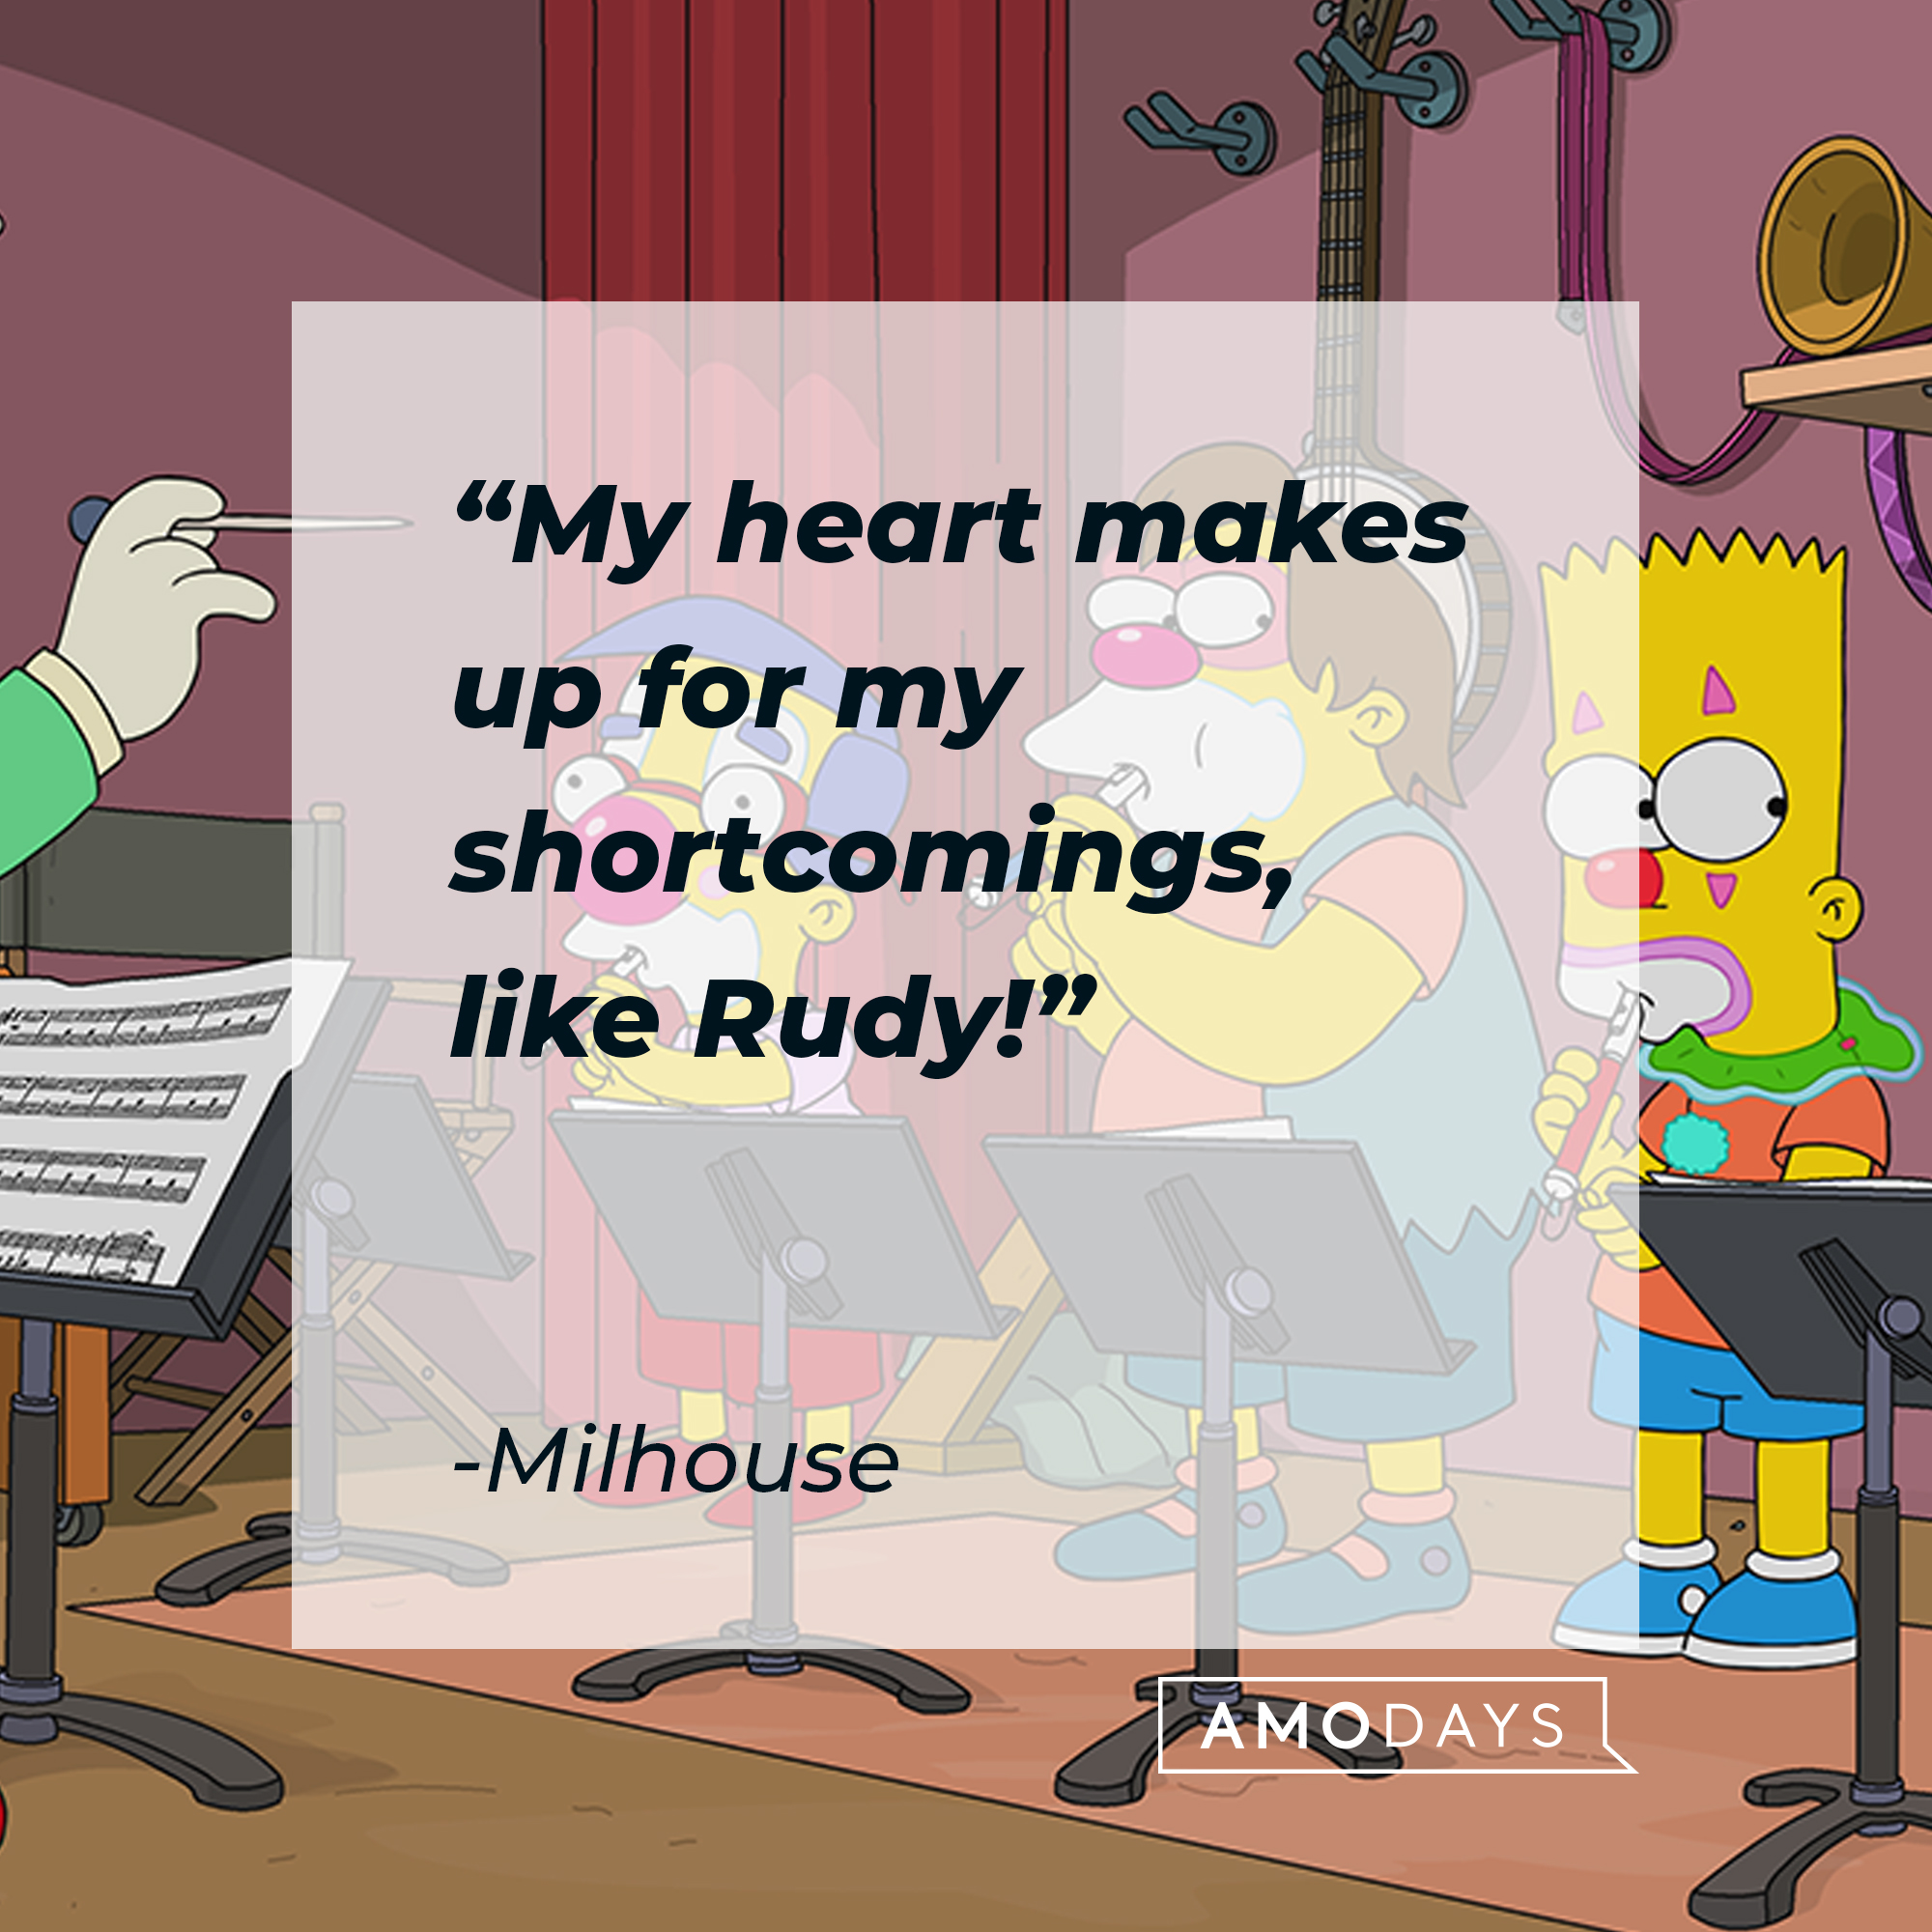 Nelson Mandela Muntz, Bart Simpson, and Milhouse, with Milhouse's quote: “My heart makes up for my shortcomings, like Rudy!” | Source: facebook.com/TheSimpsons